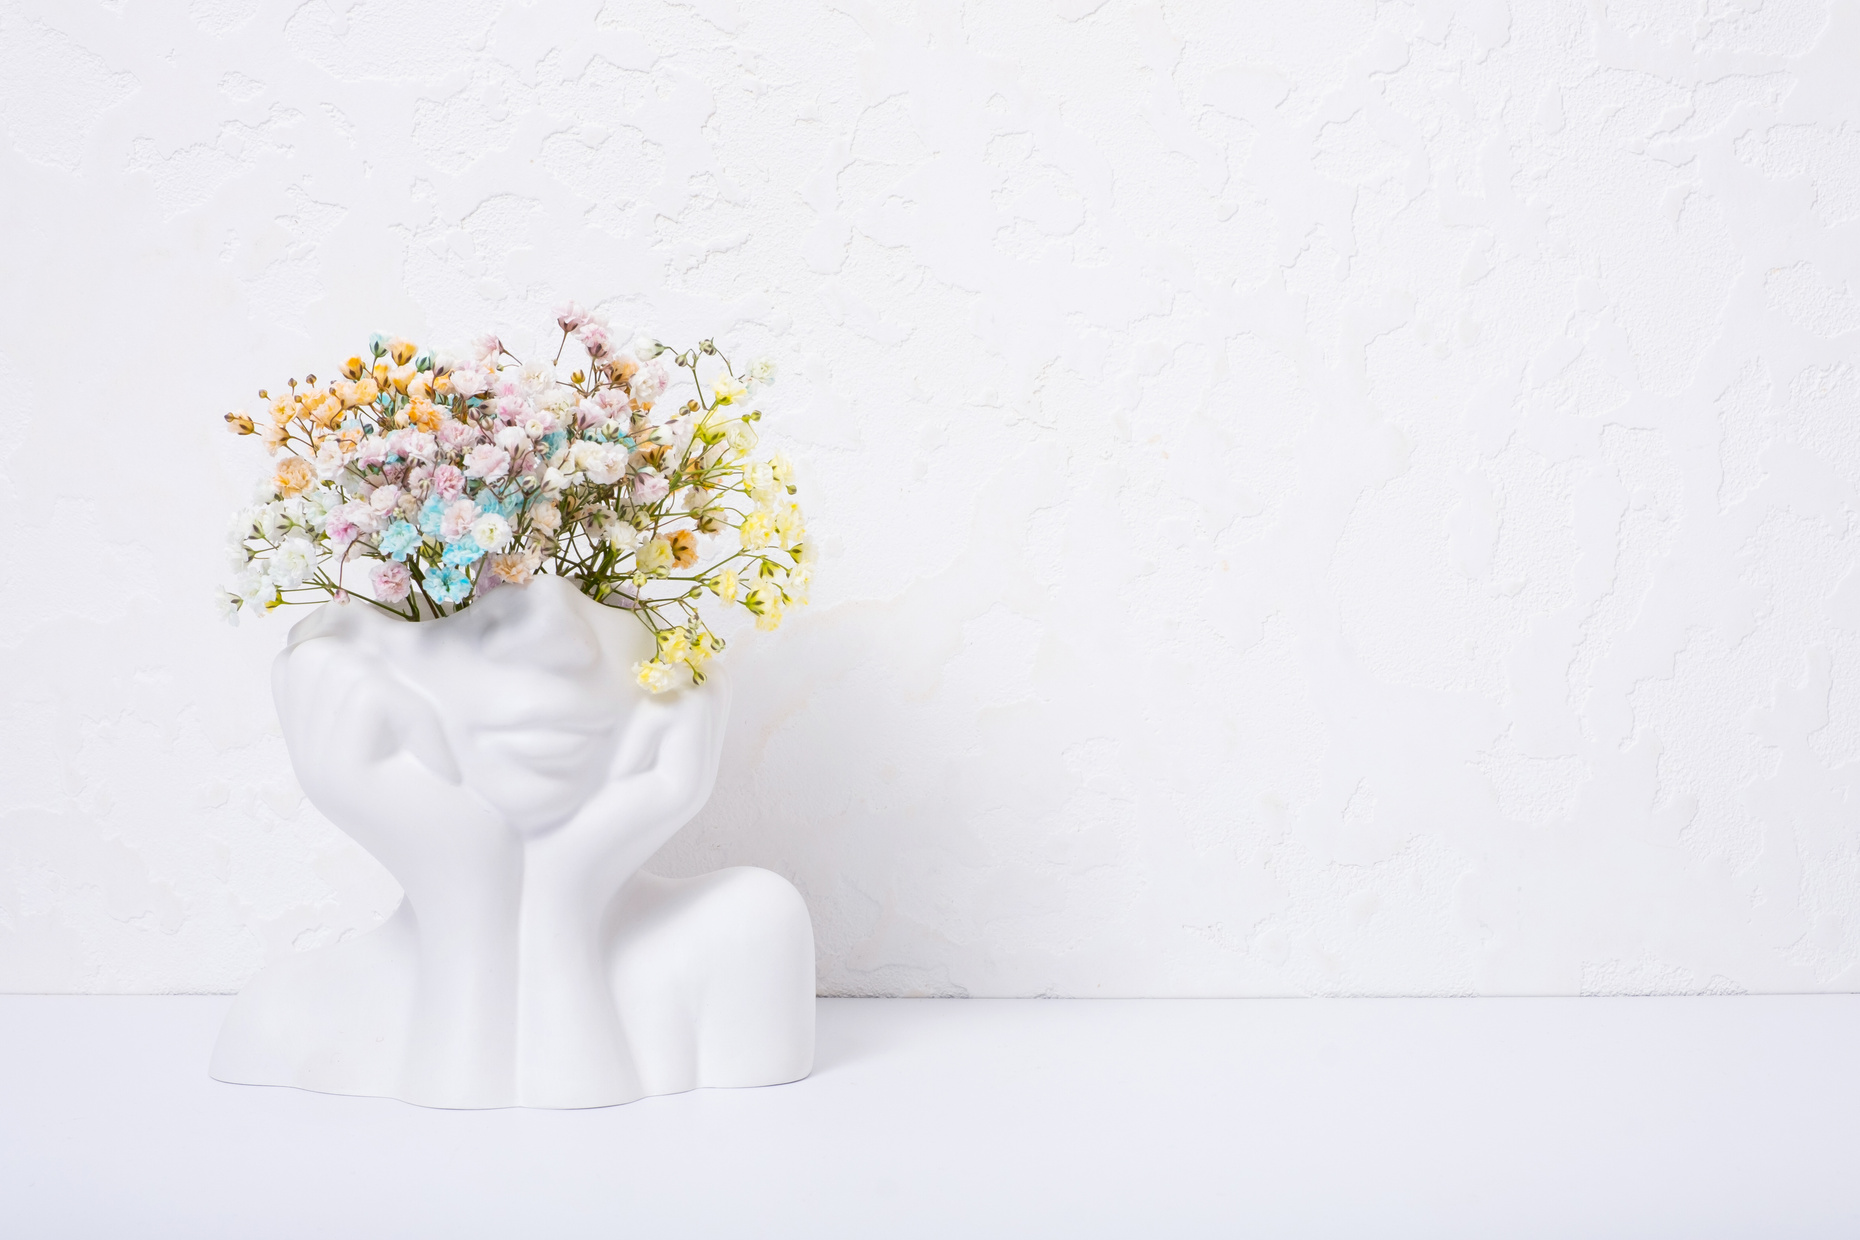 Creative plaster vase head-shape with colorful flowers. Mind car